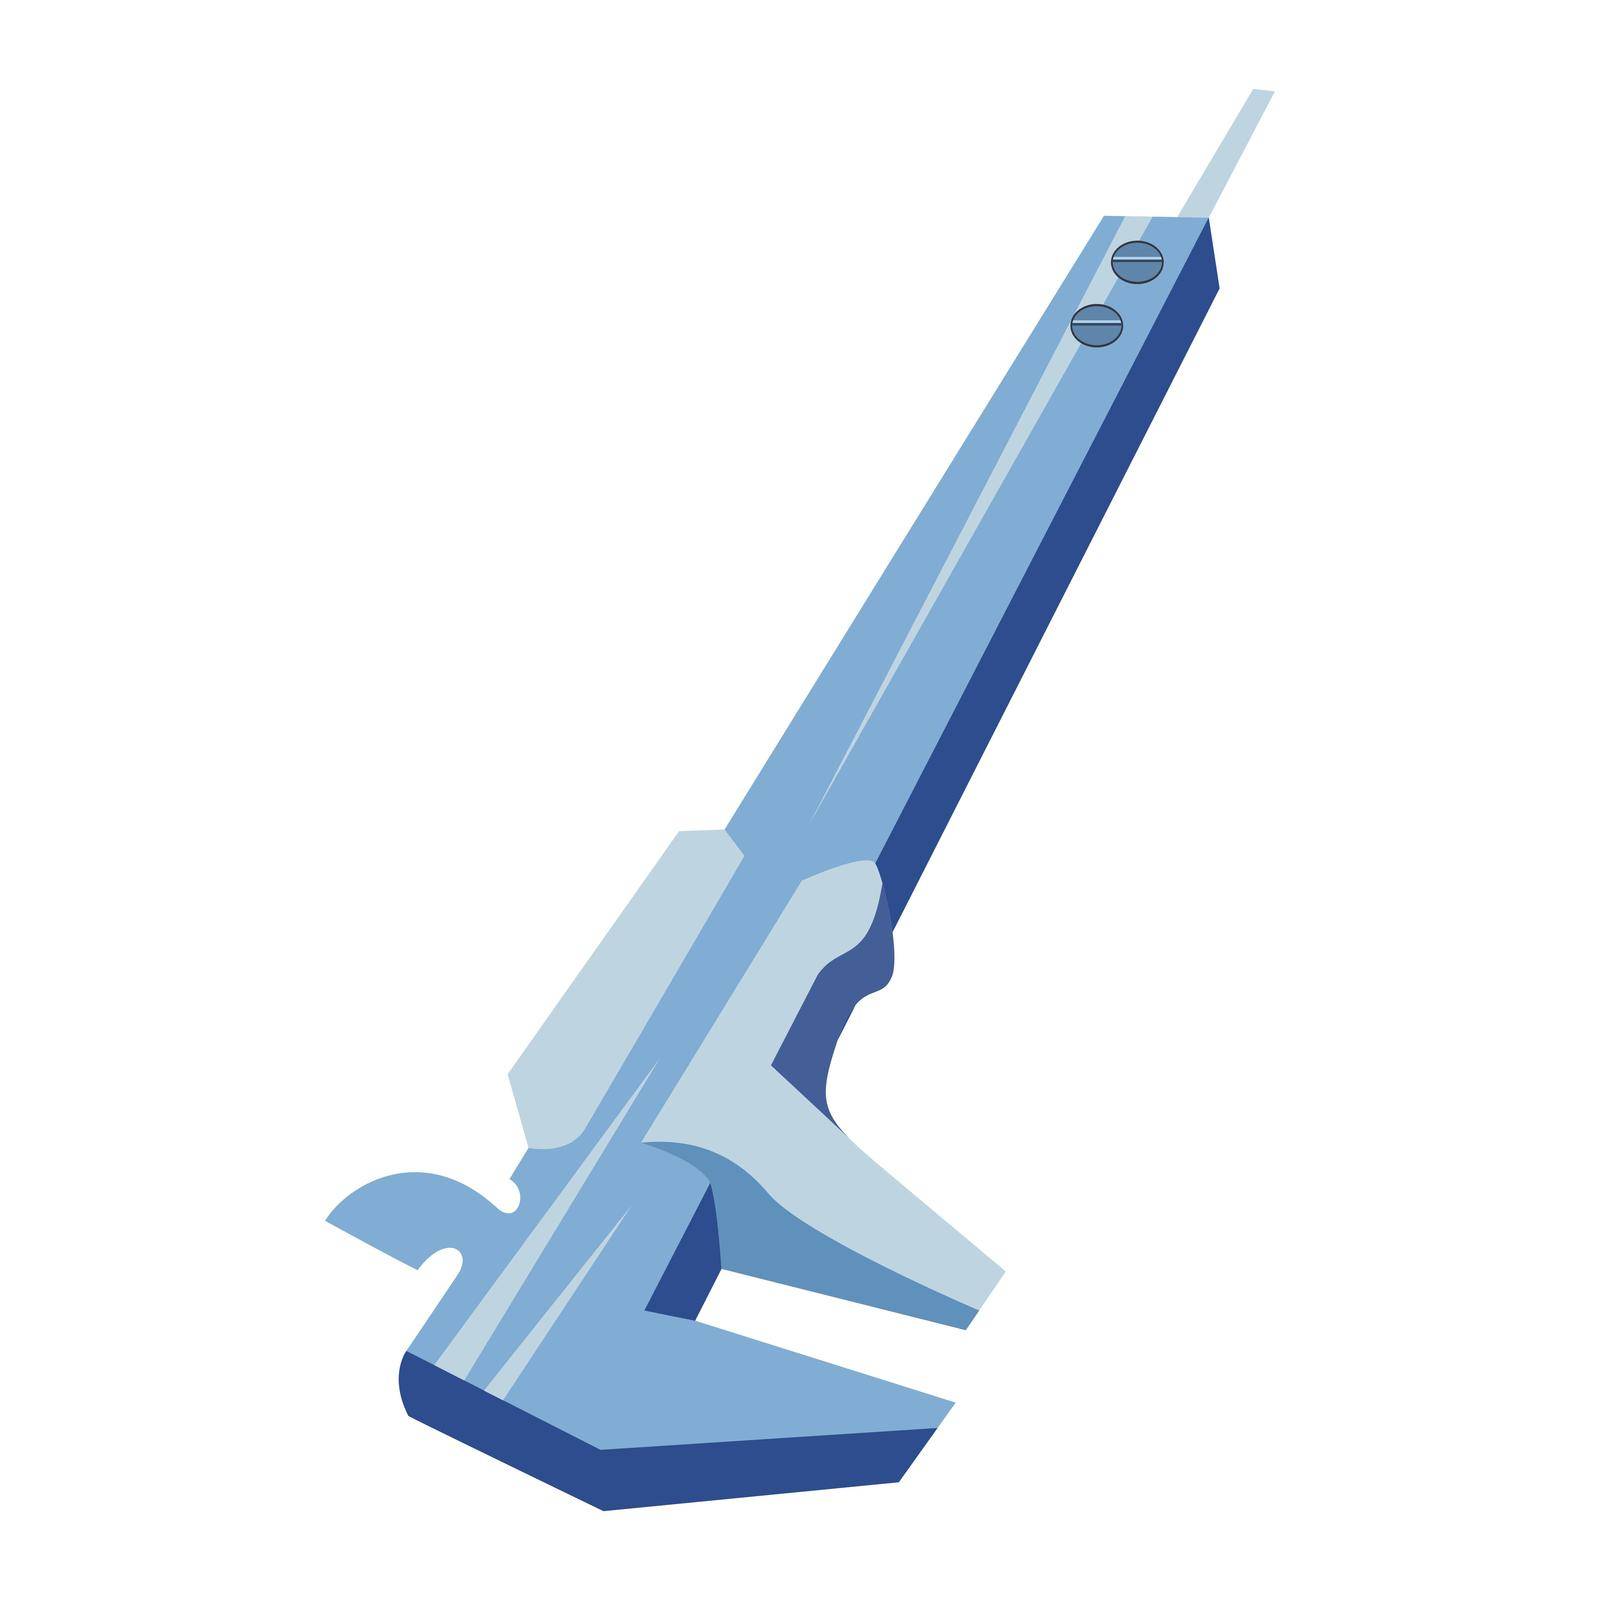 The vernier caliper is used for measuring the height of an object, equipped flat illustration. by ANITA